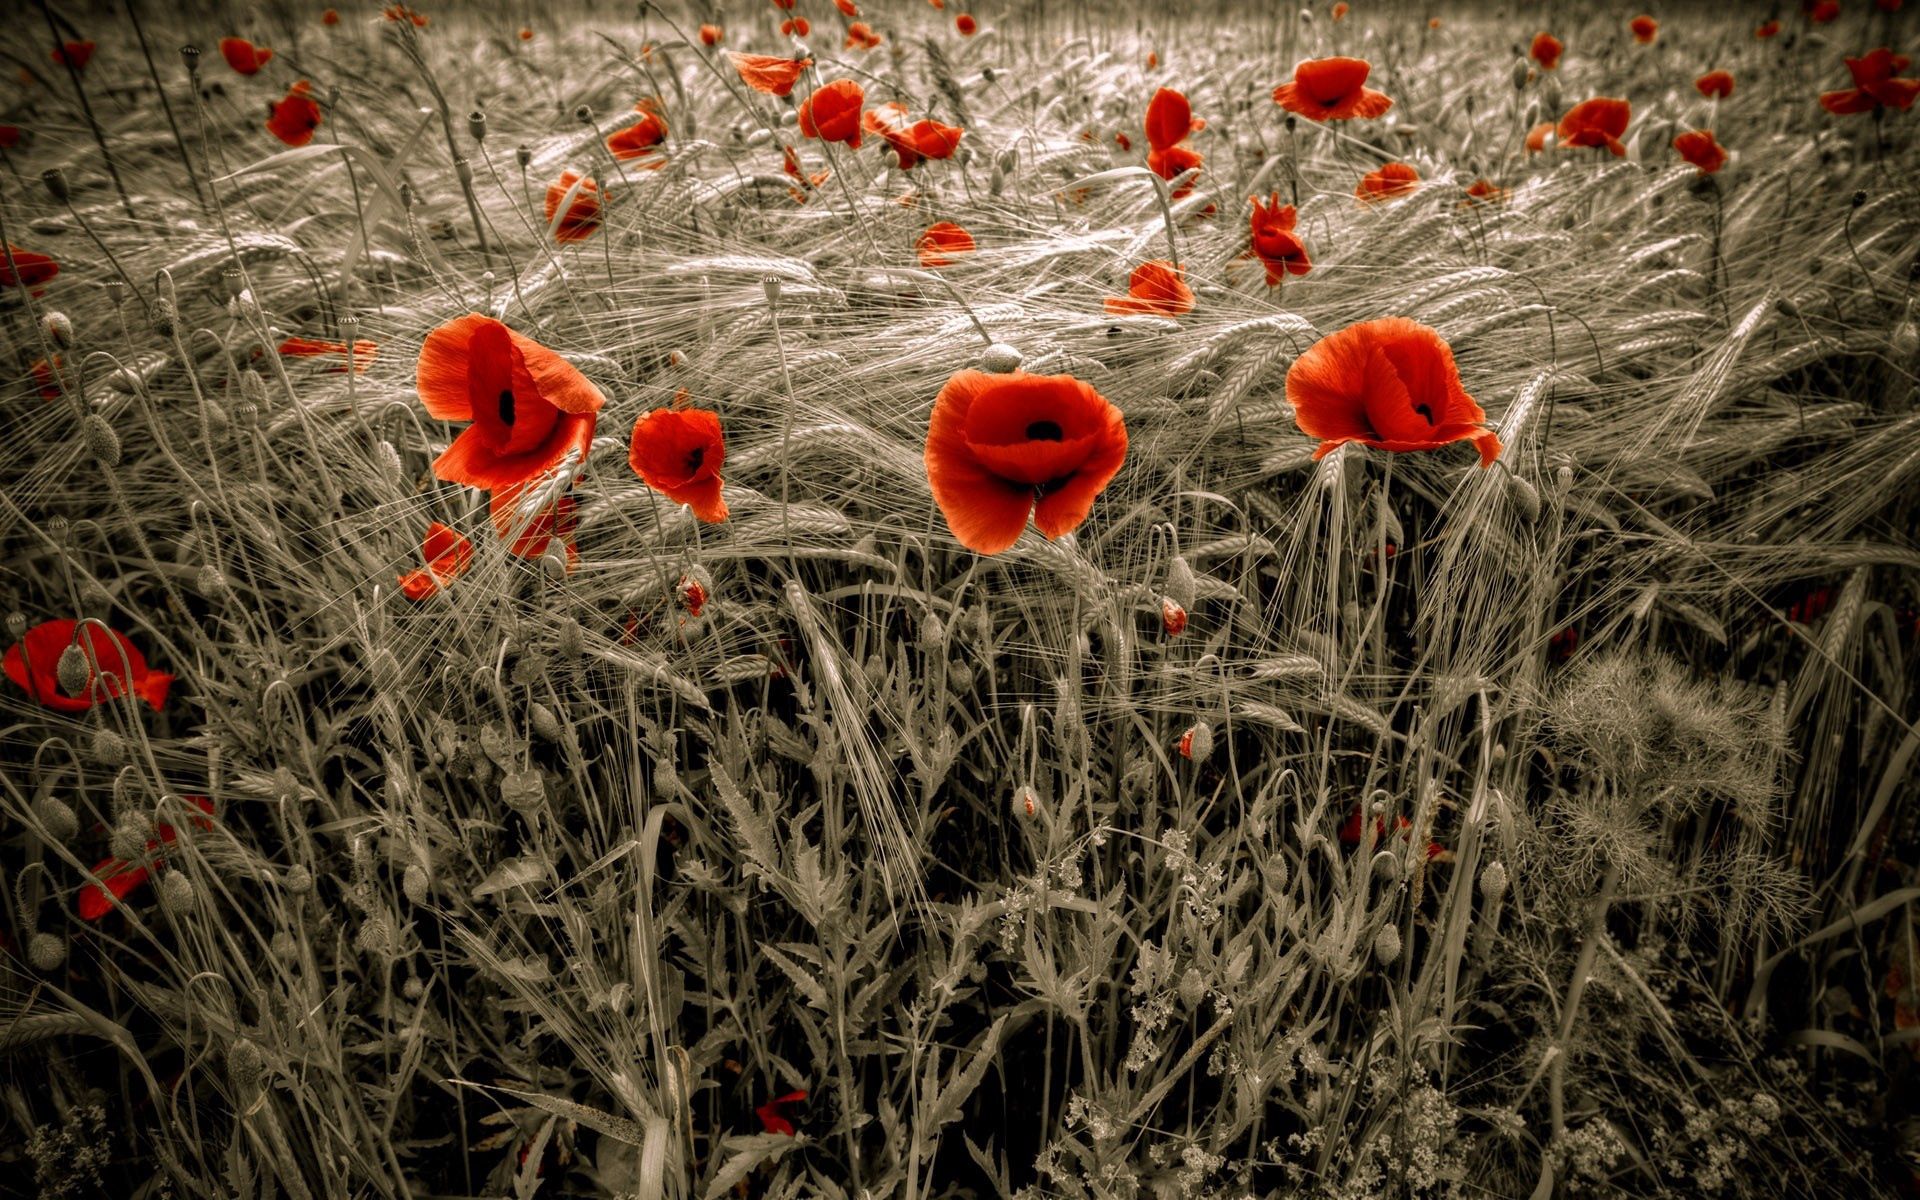 New Lock Screen Wallpapers nature, flowers, poppies, red, field, ears, spikes